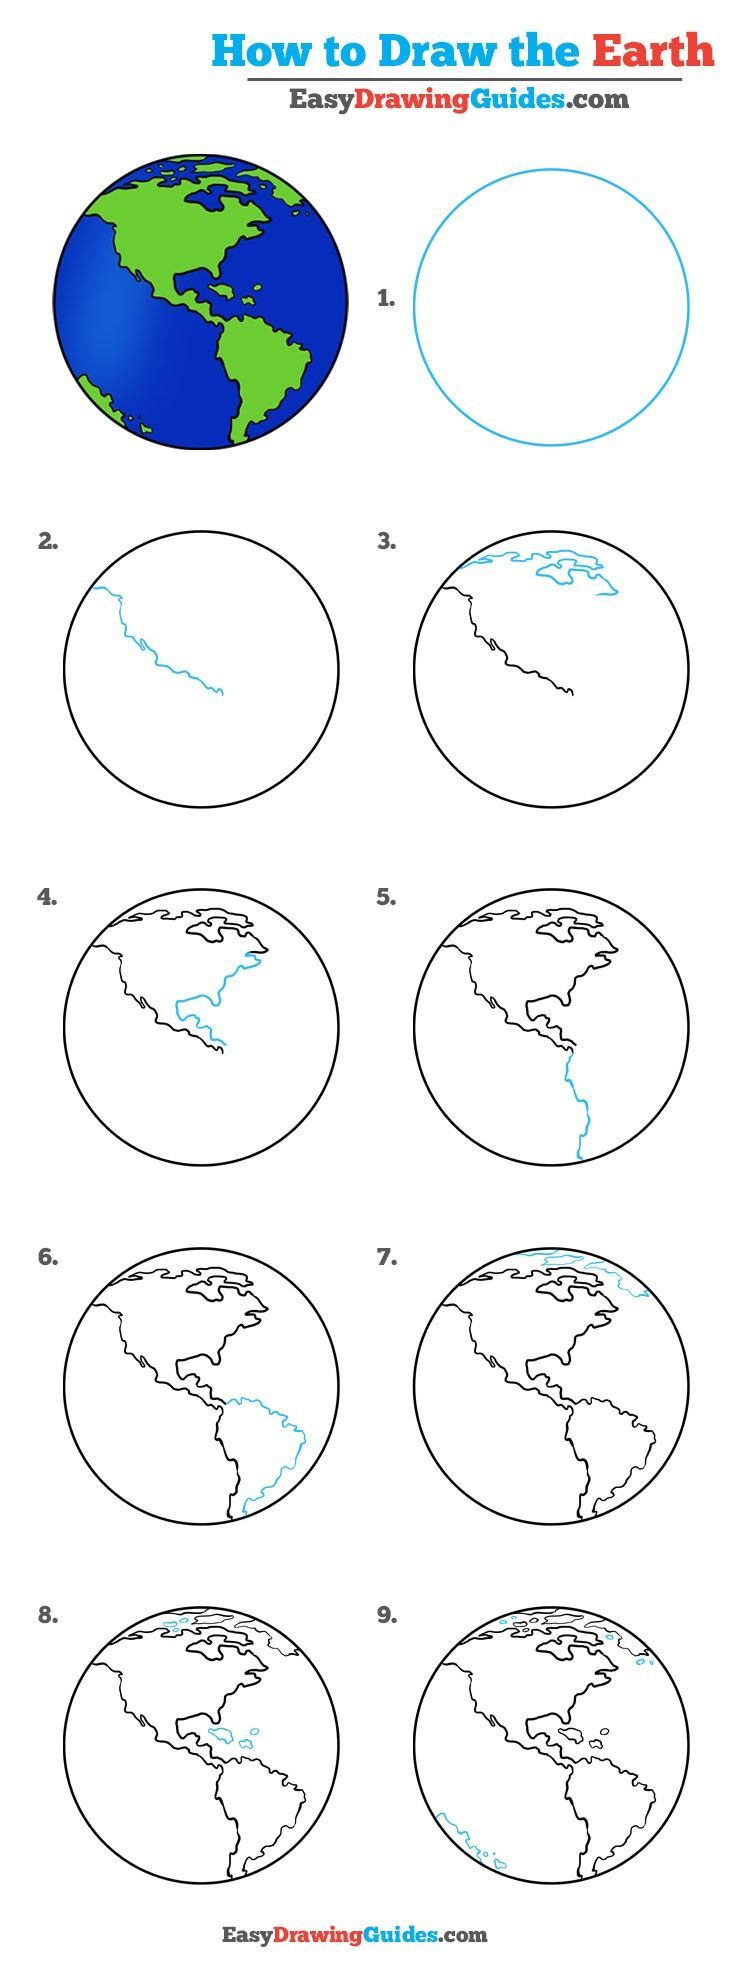 How To Draw The Earth - Really Easy Drawing Tutorial